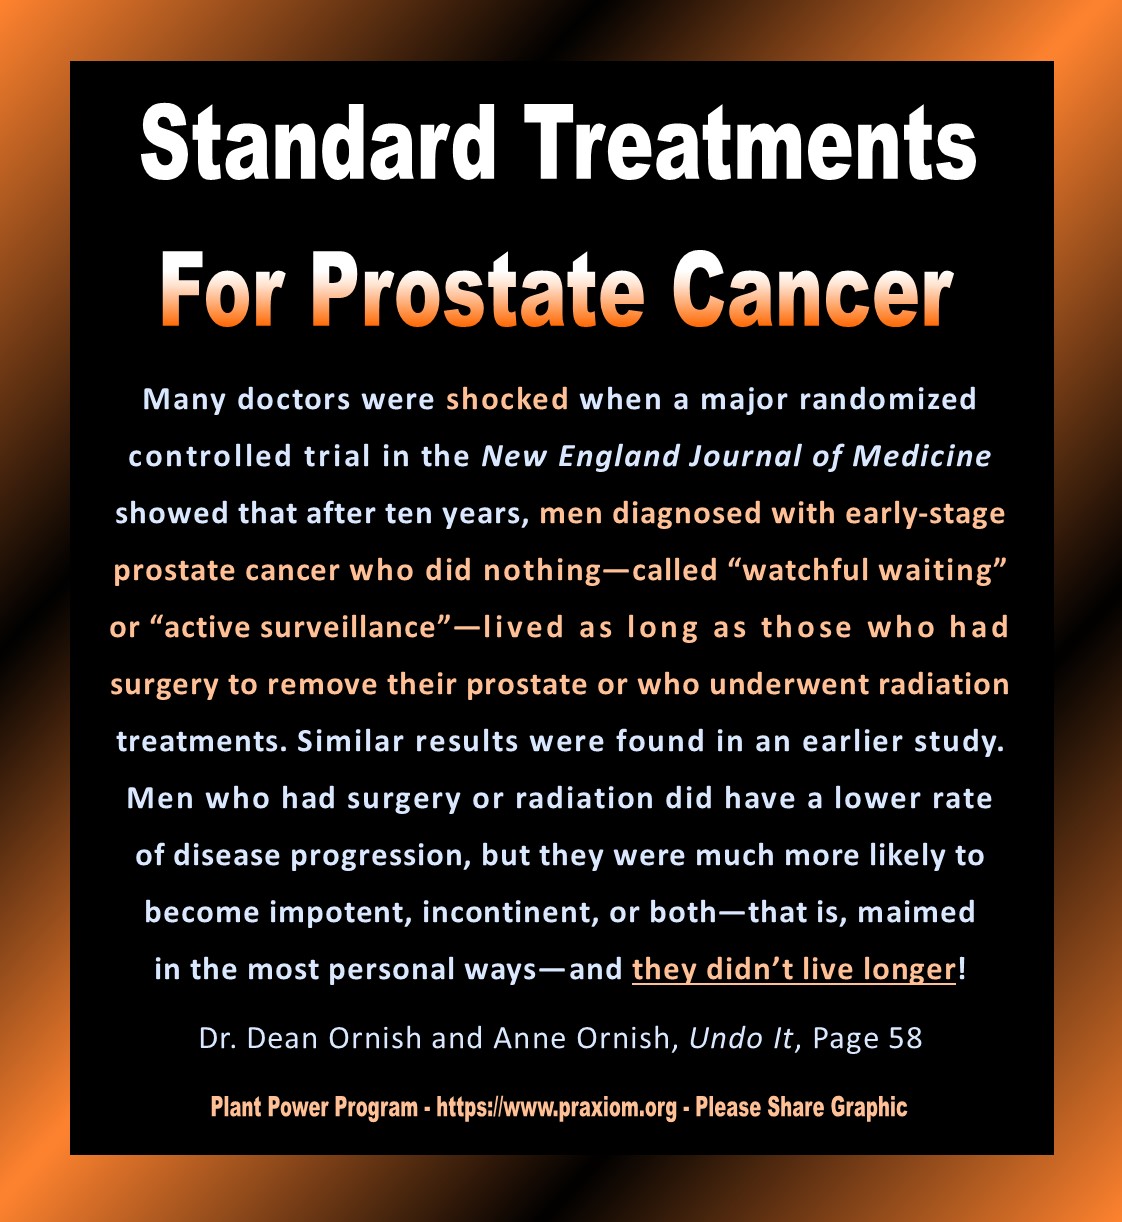 Standard Treatments for Prostate Cancer - Dr. Dean Ornish